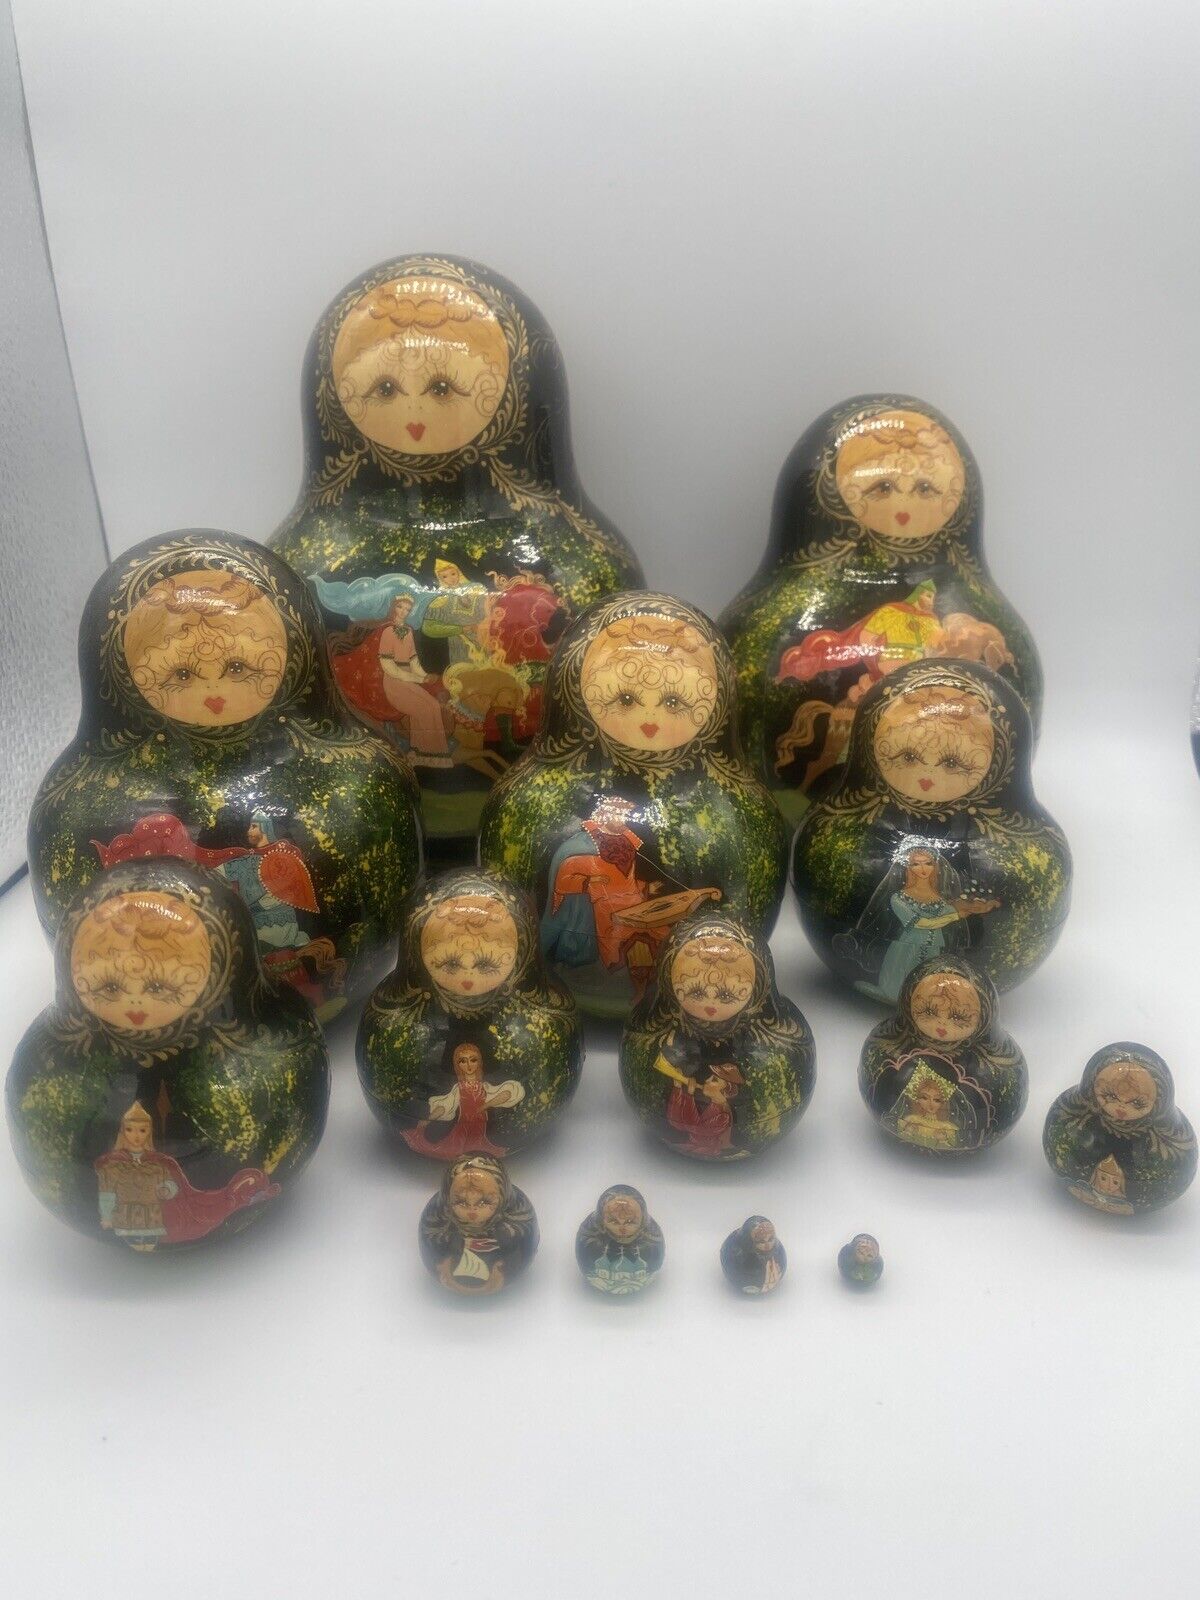 VTG - RARE - XLG Signed Russian Wood Handpainted Nesting Fairy Tale 14pcs